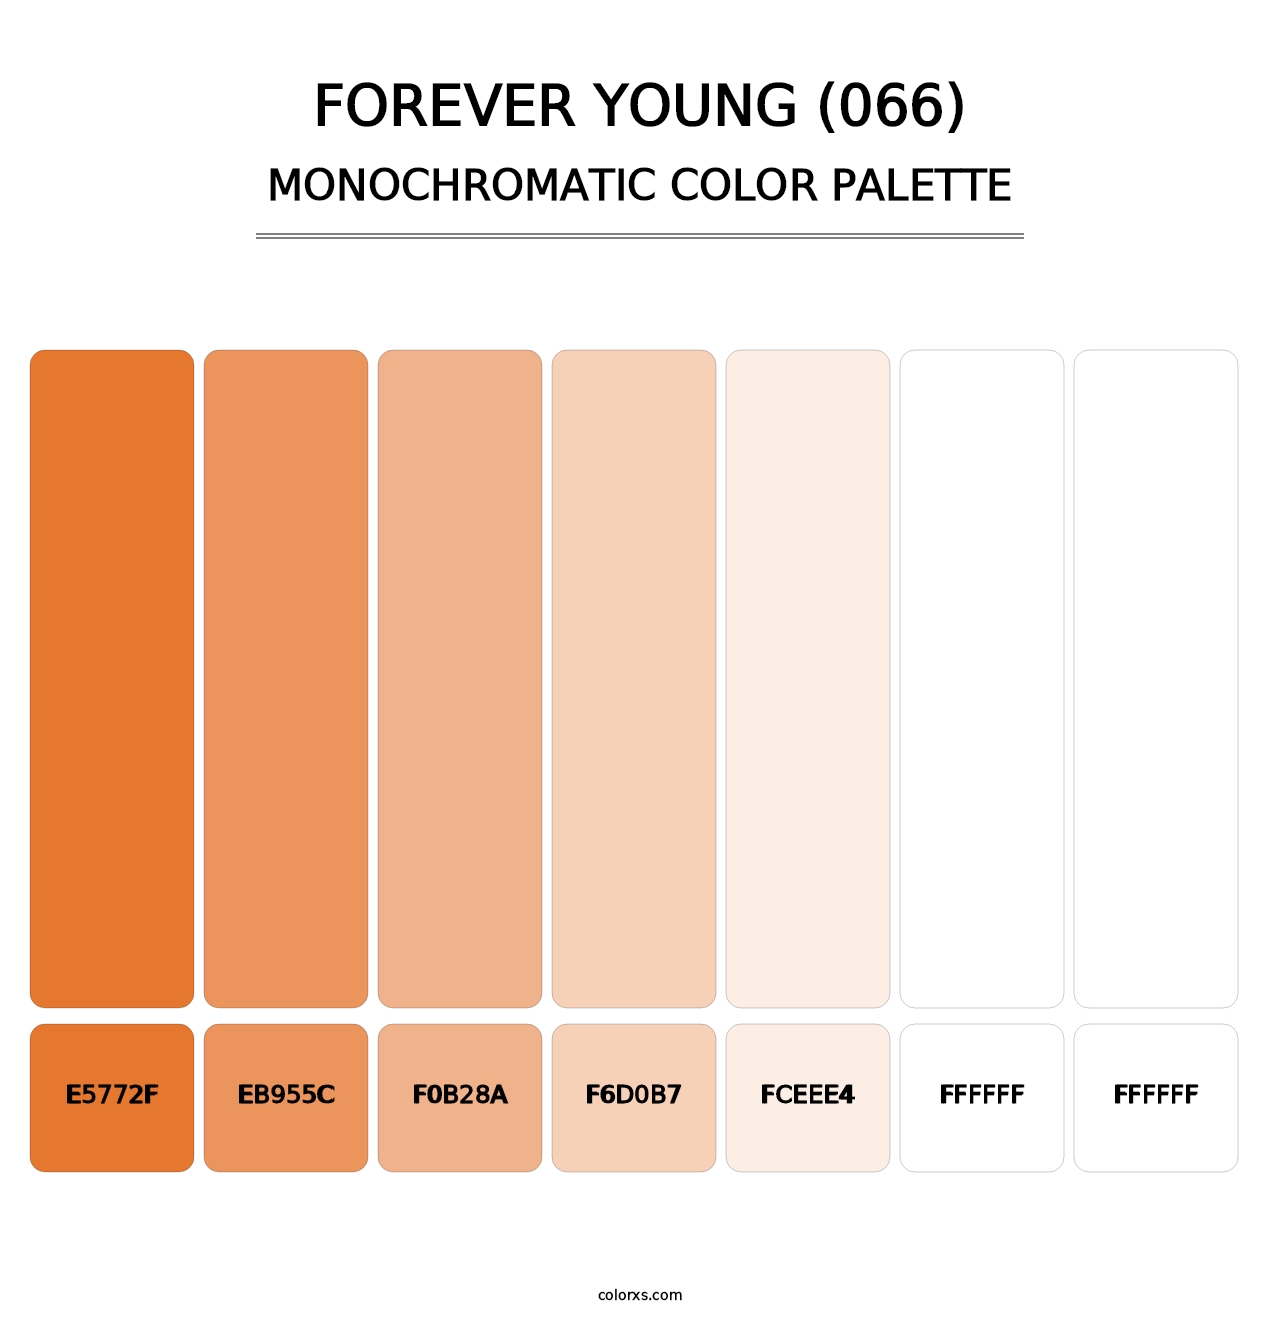 Forever Young (066) - Monochromatic Color Palette